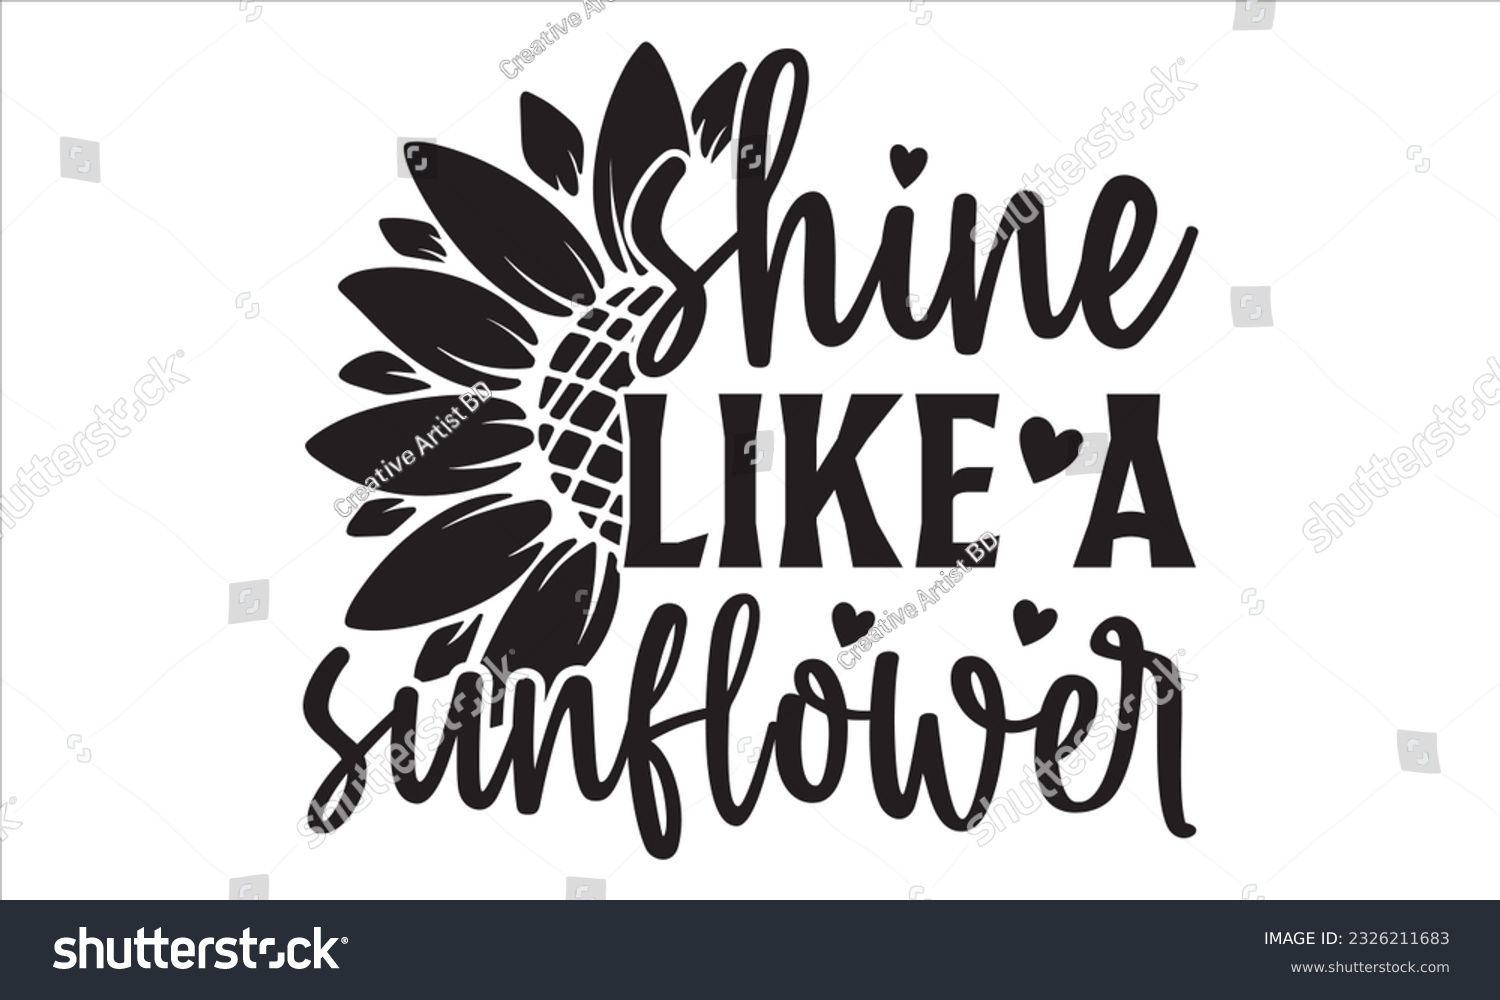 SVG of Shine like a Sunflower - Sunflower SVG Design, Handmade calligraphy vector illustration, Isolated on white background, svg Files for Cutting Cricut and Silhouette, EPS svg